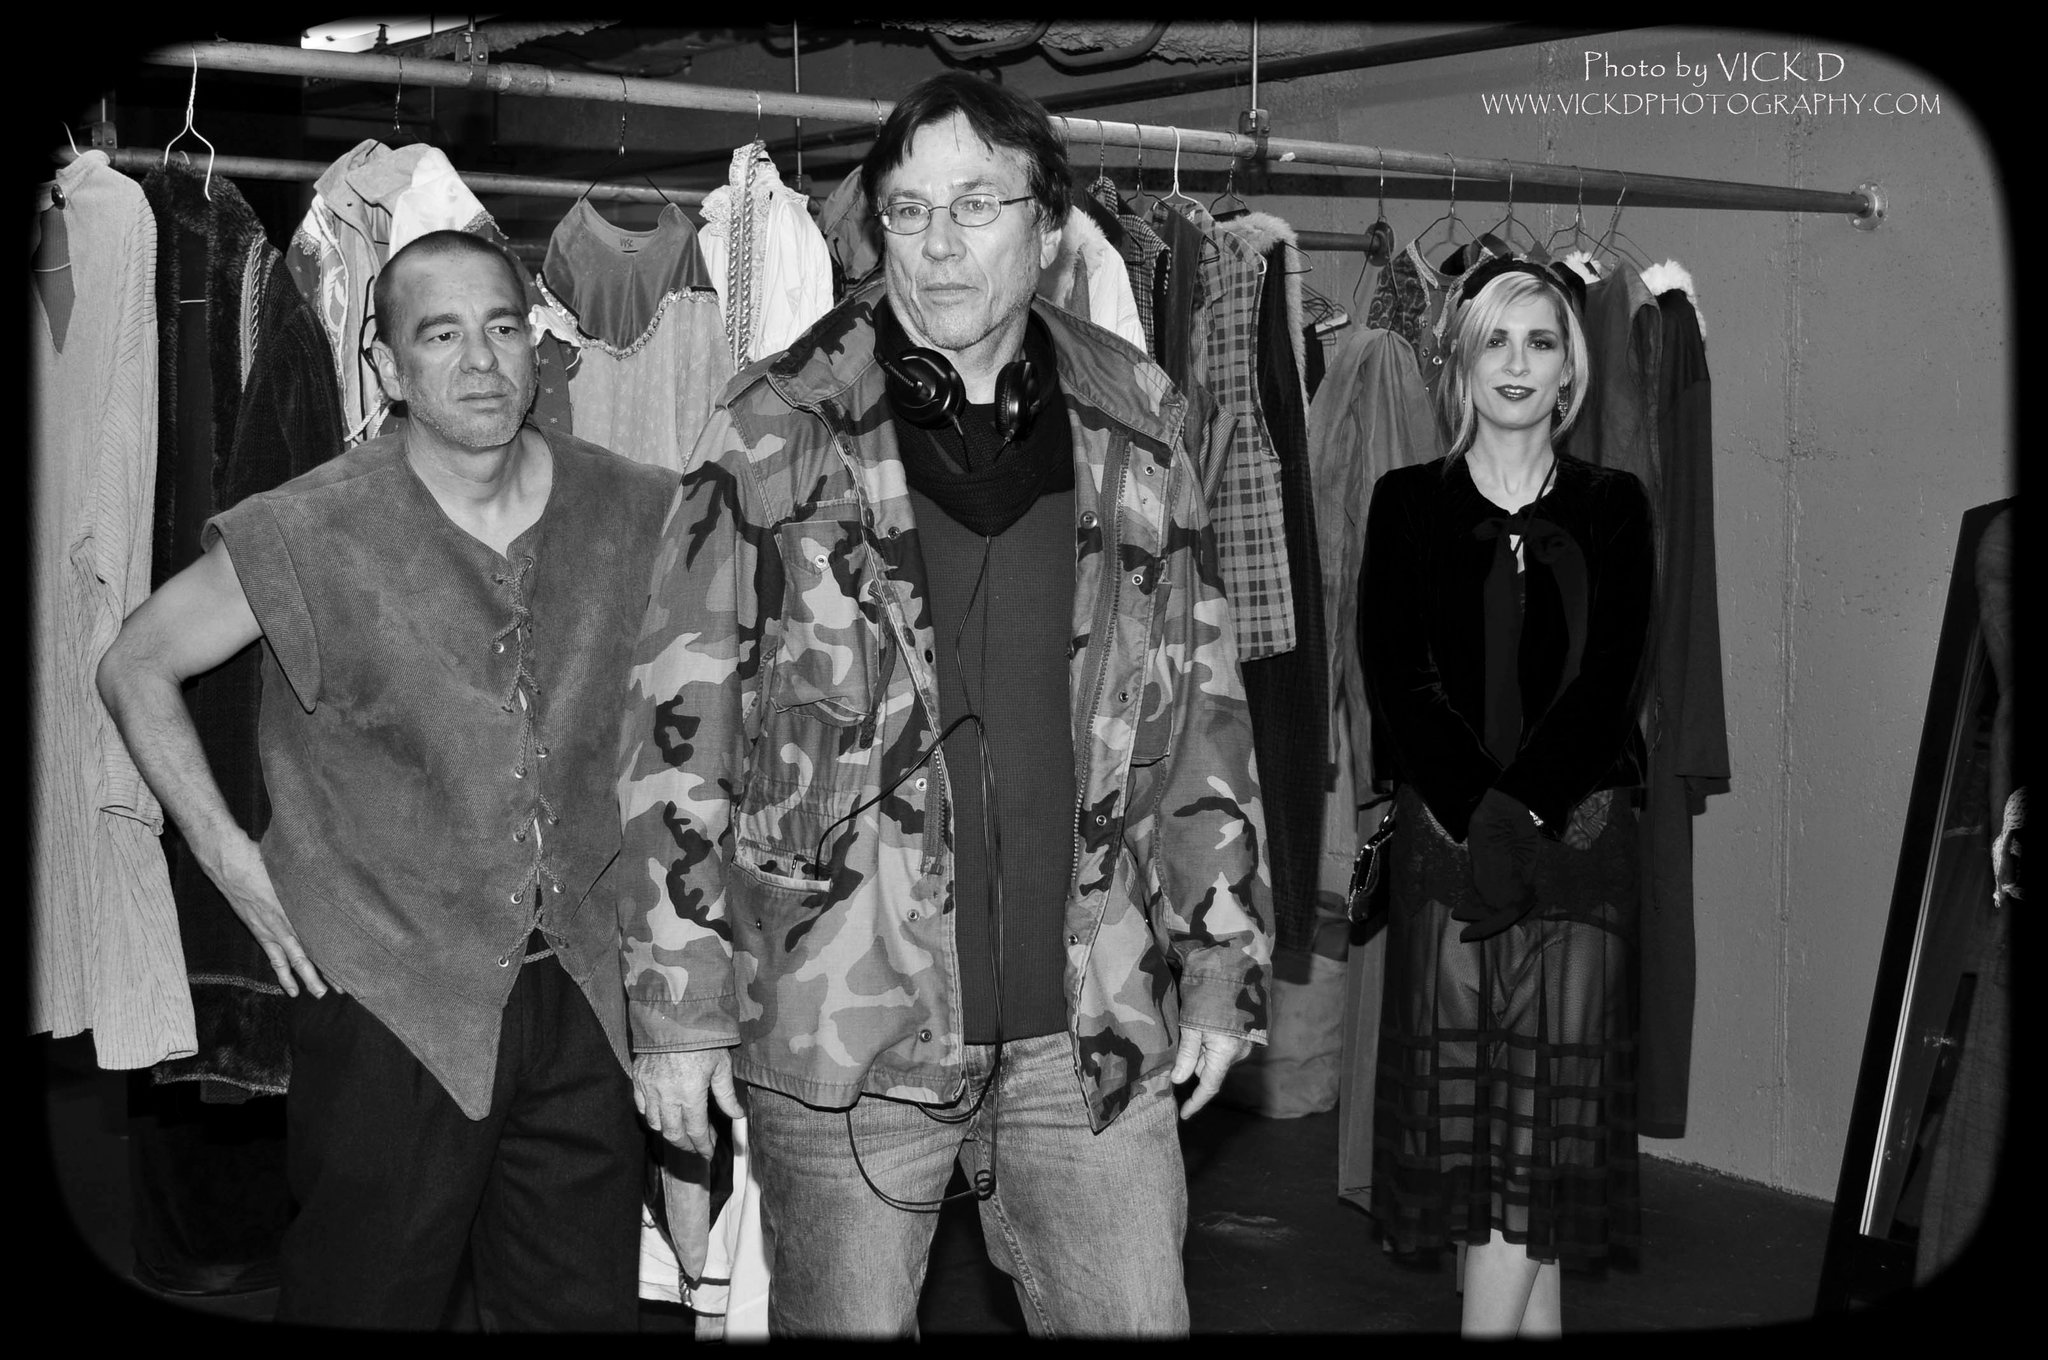 Thom Rockwell on the set of White Wings with director Richard Hatch and actress Emilyne Guglietti.